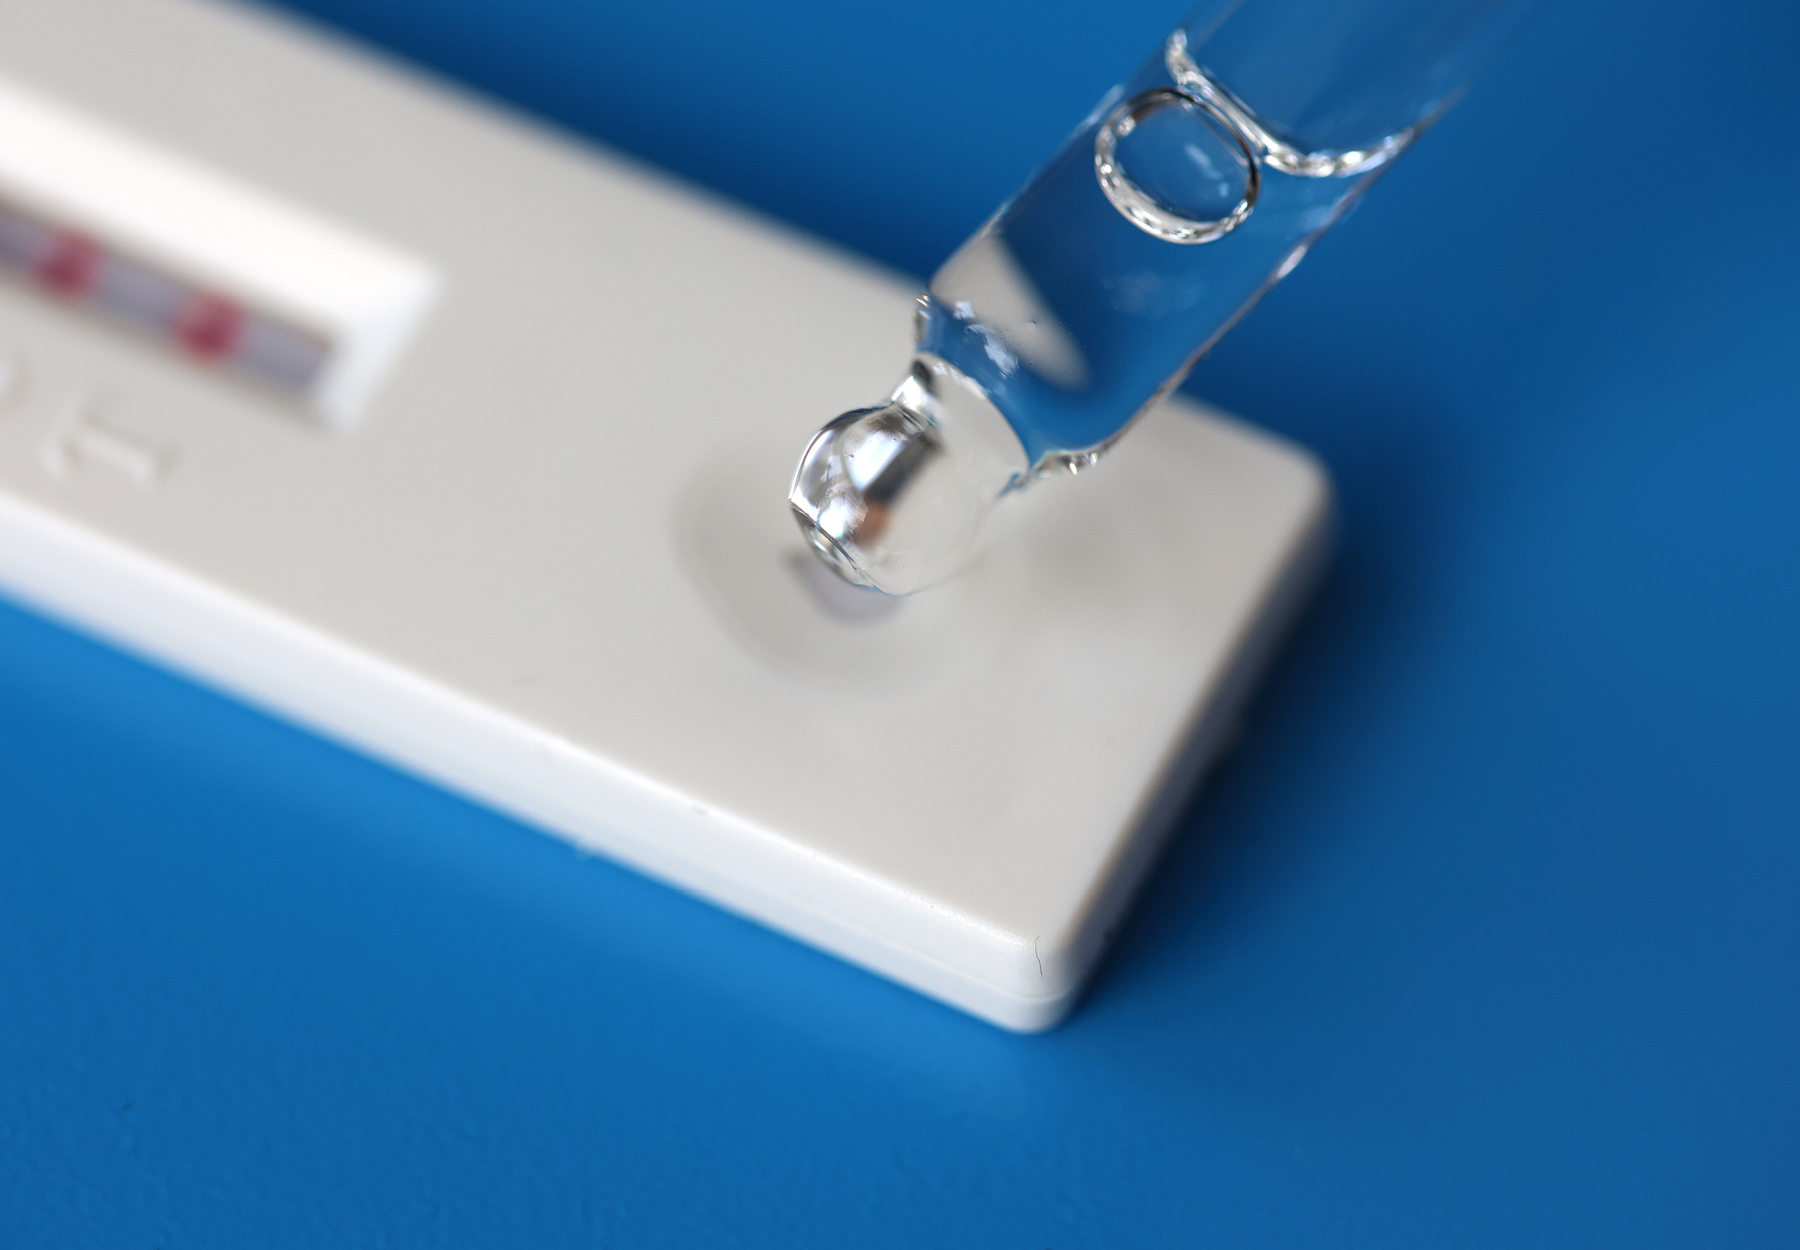 A closeup of a dropper putting fluid onto a COVID-19 rapid antigen test cartridge on a blue surface. Stock photo.